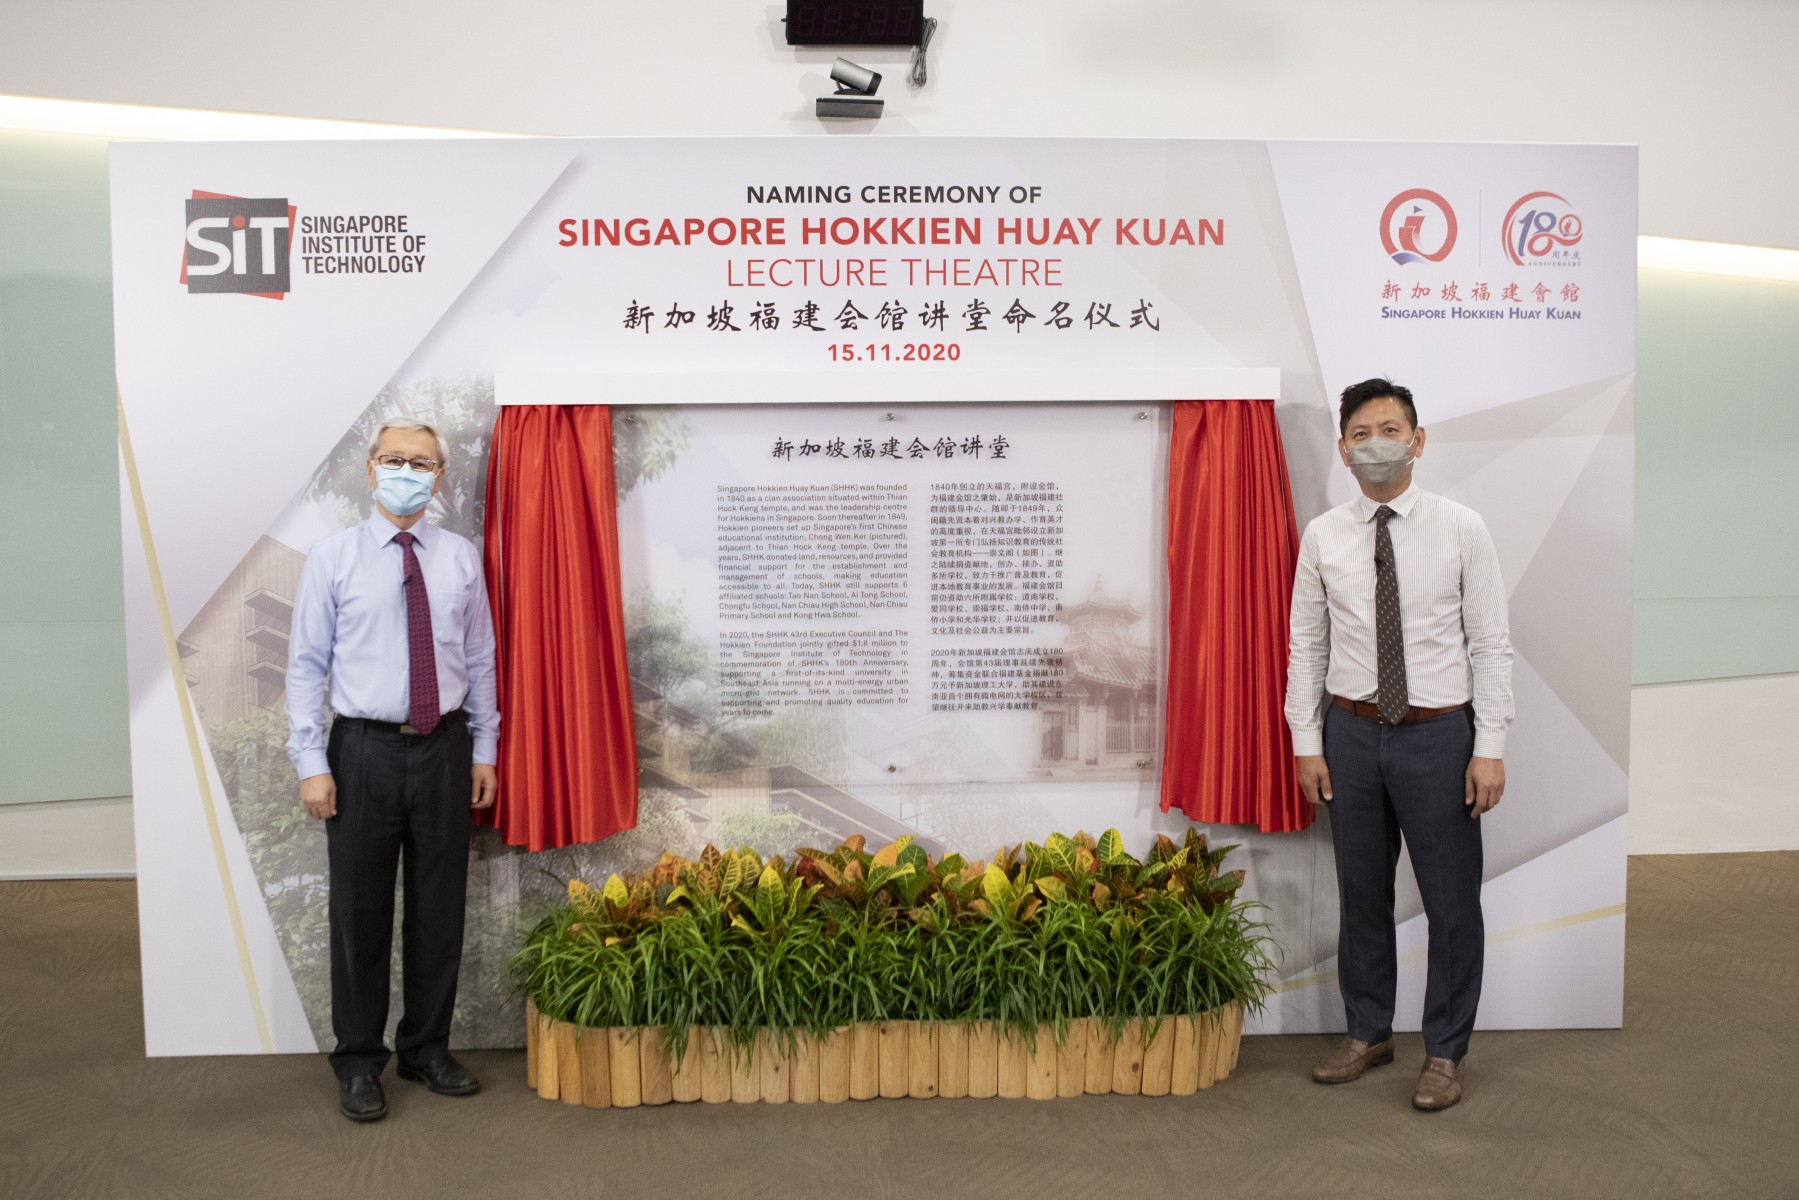 At the naming ceremony for the Singapore Hokkien Huay Kuan Lecture Theatre at SIT’s interim campus in Dover